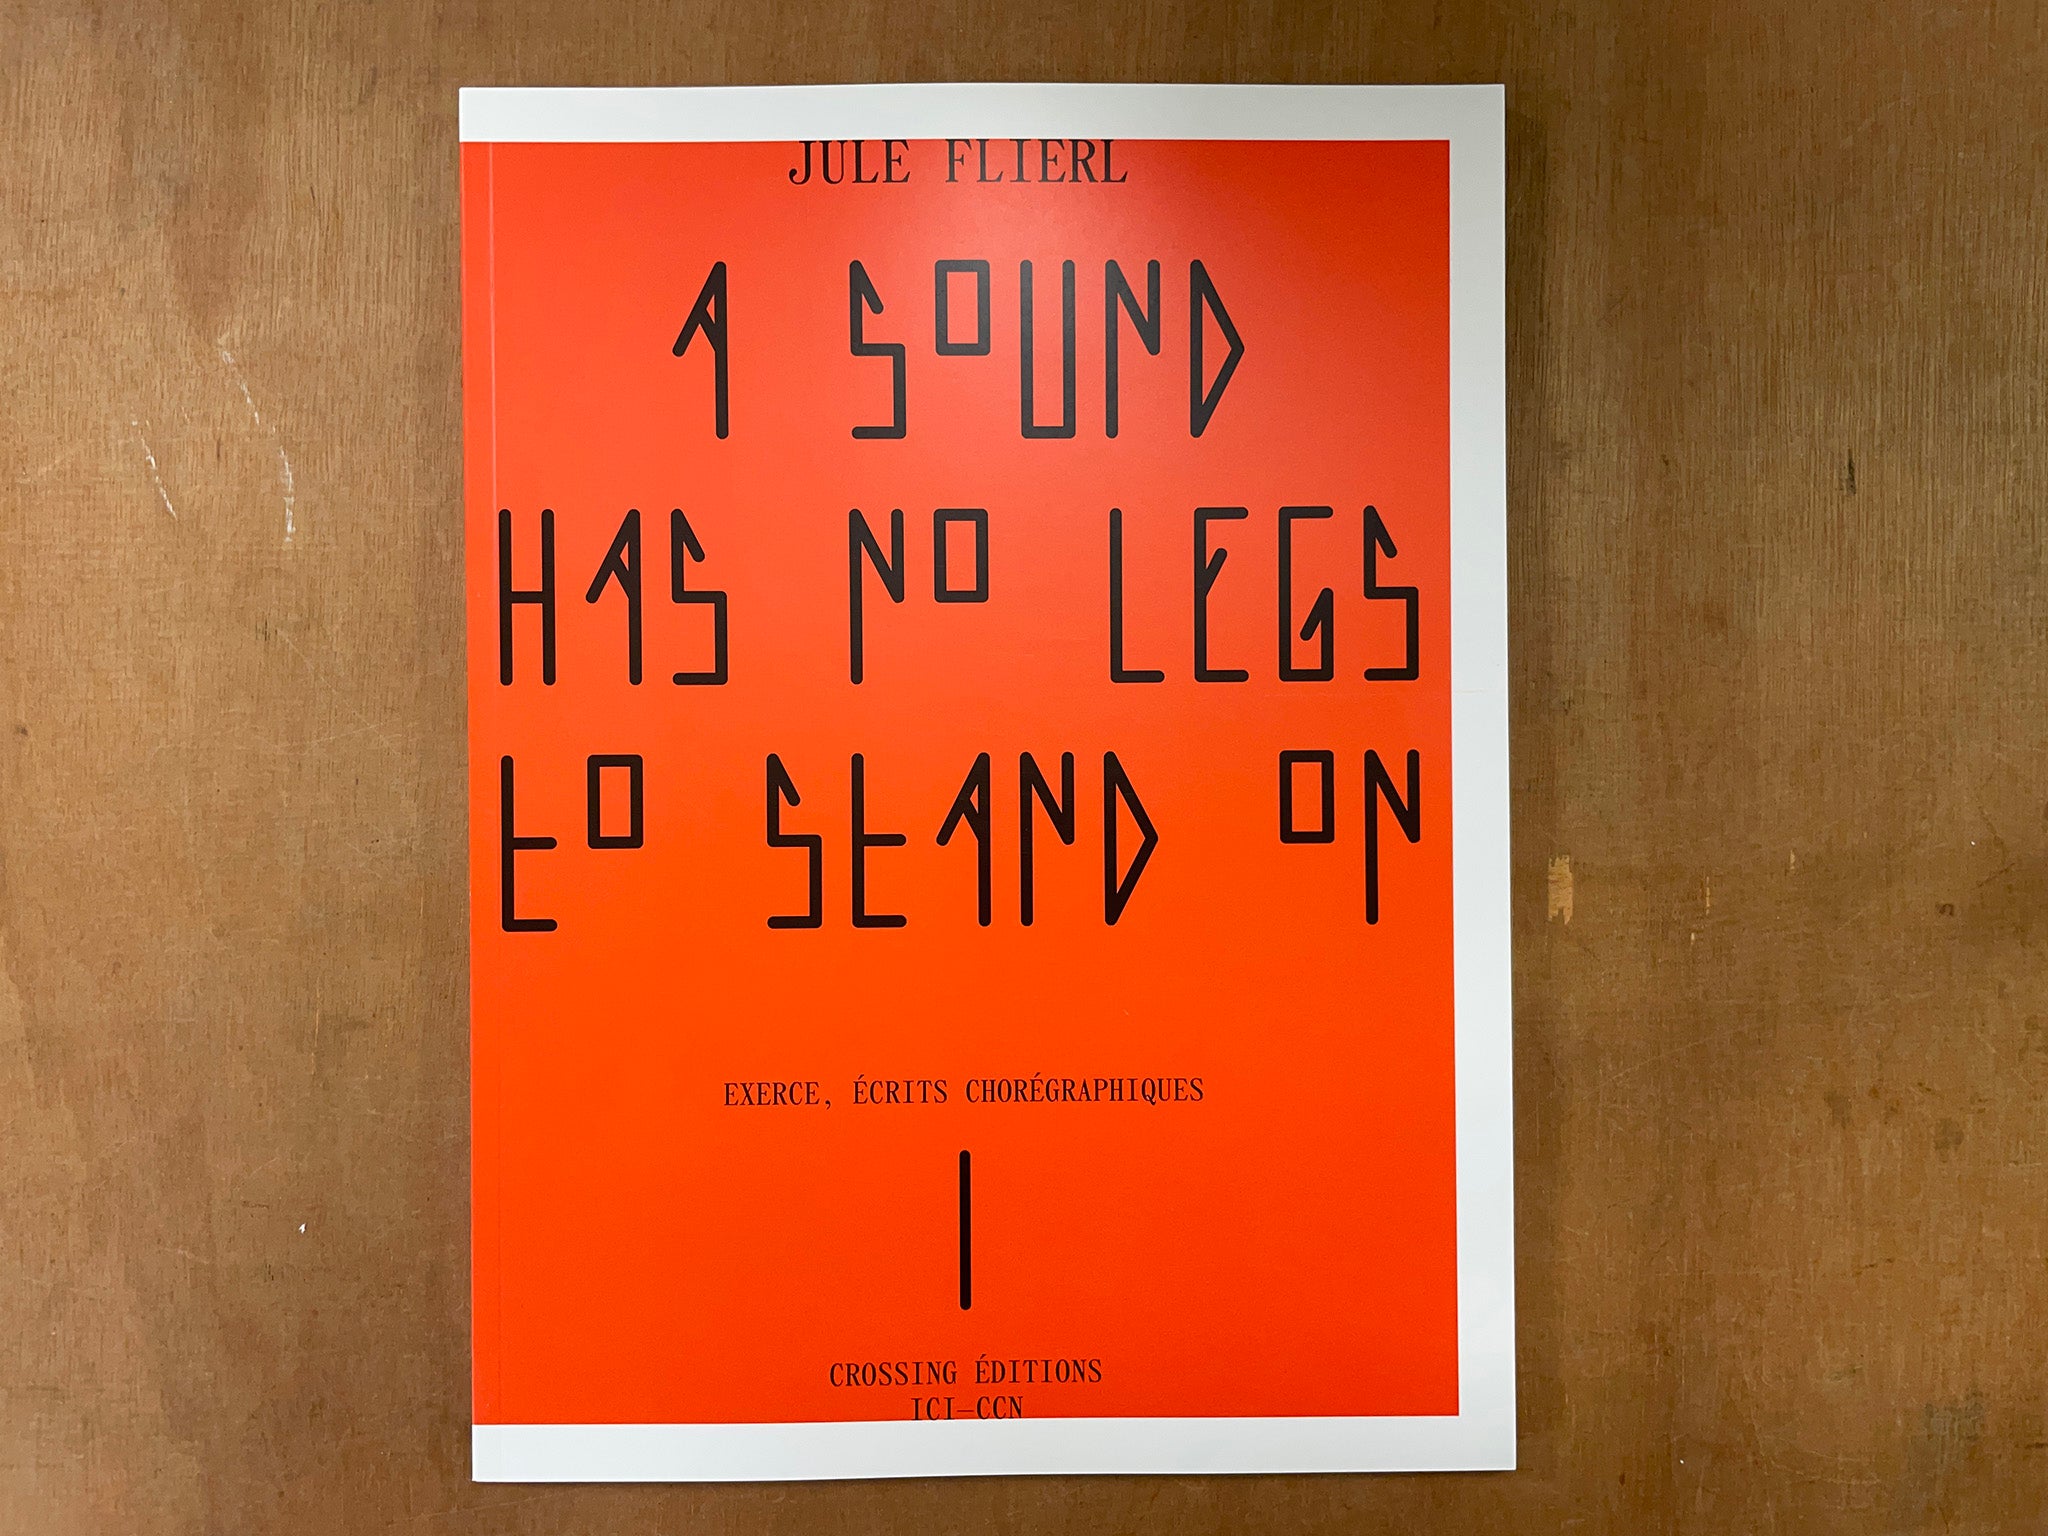 A SOUND HAS NO LEGS TO STAND ON by Julie Flierl